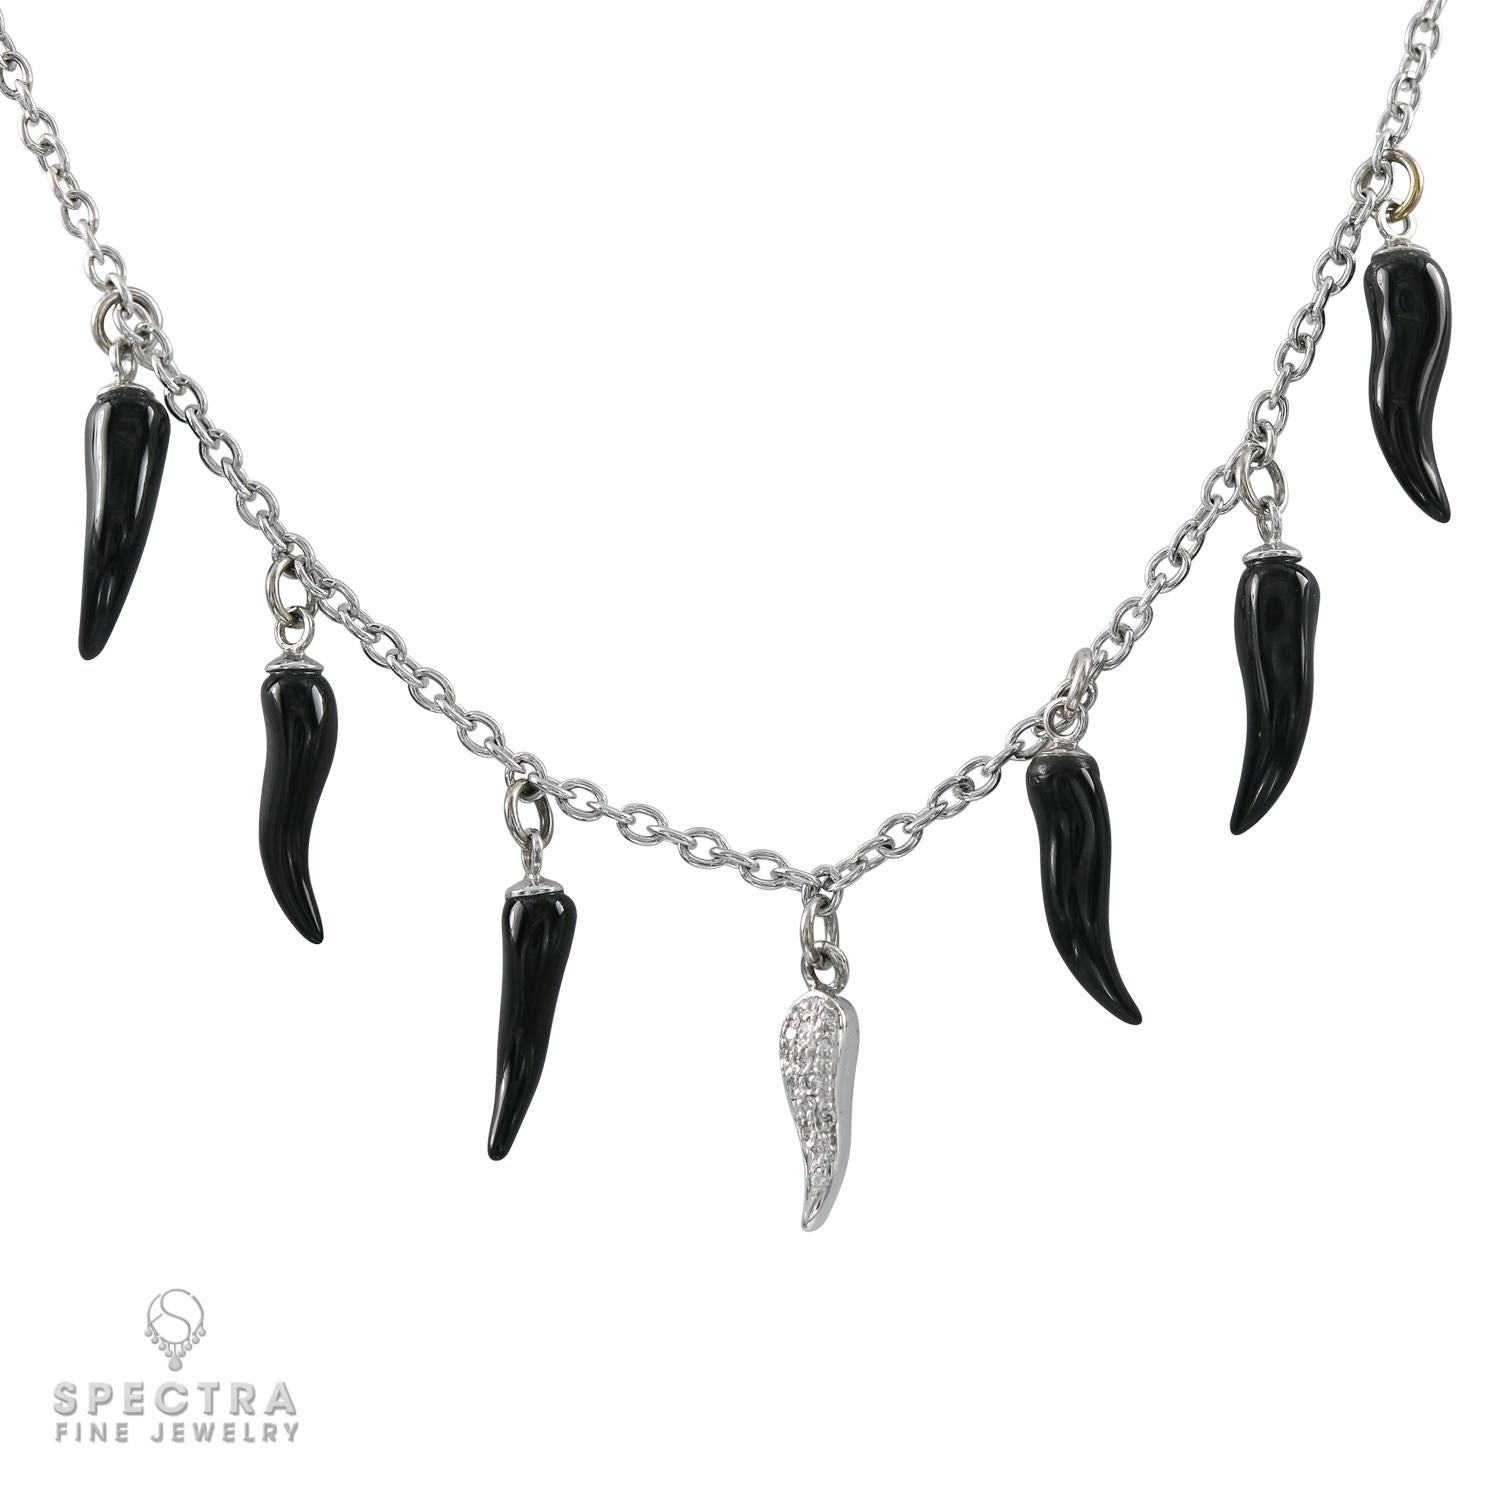 Everyone could use a little extra good luck, especially when it comes in such a lovely form as a charm necklace. This Adamas Cornicello Diamond Onyx Necklace features 7 cornicelli (singular, cornicello or corno portafortuna), or Italian horns, in